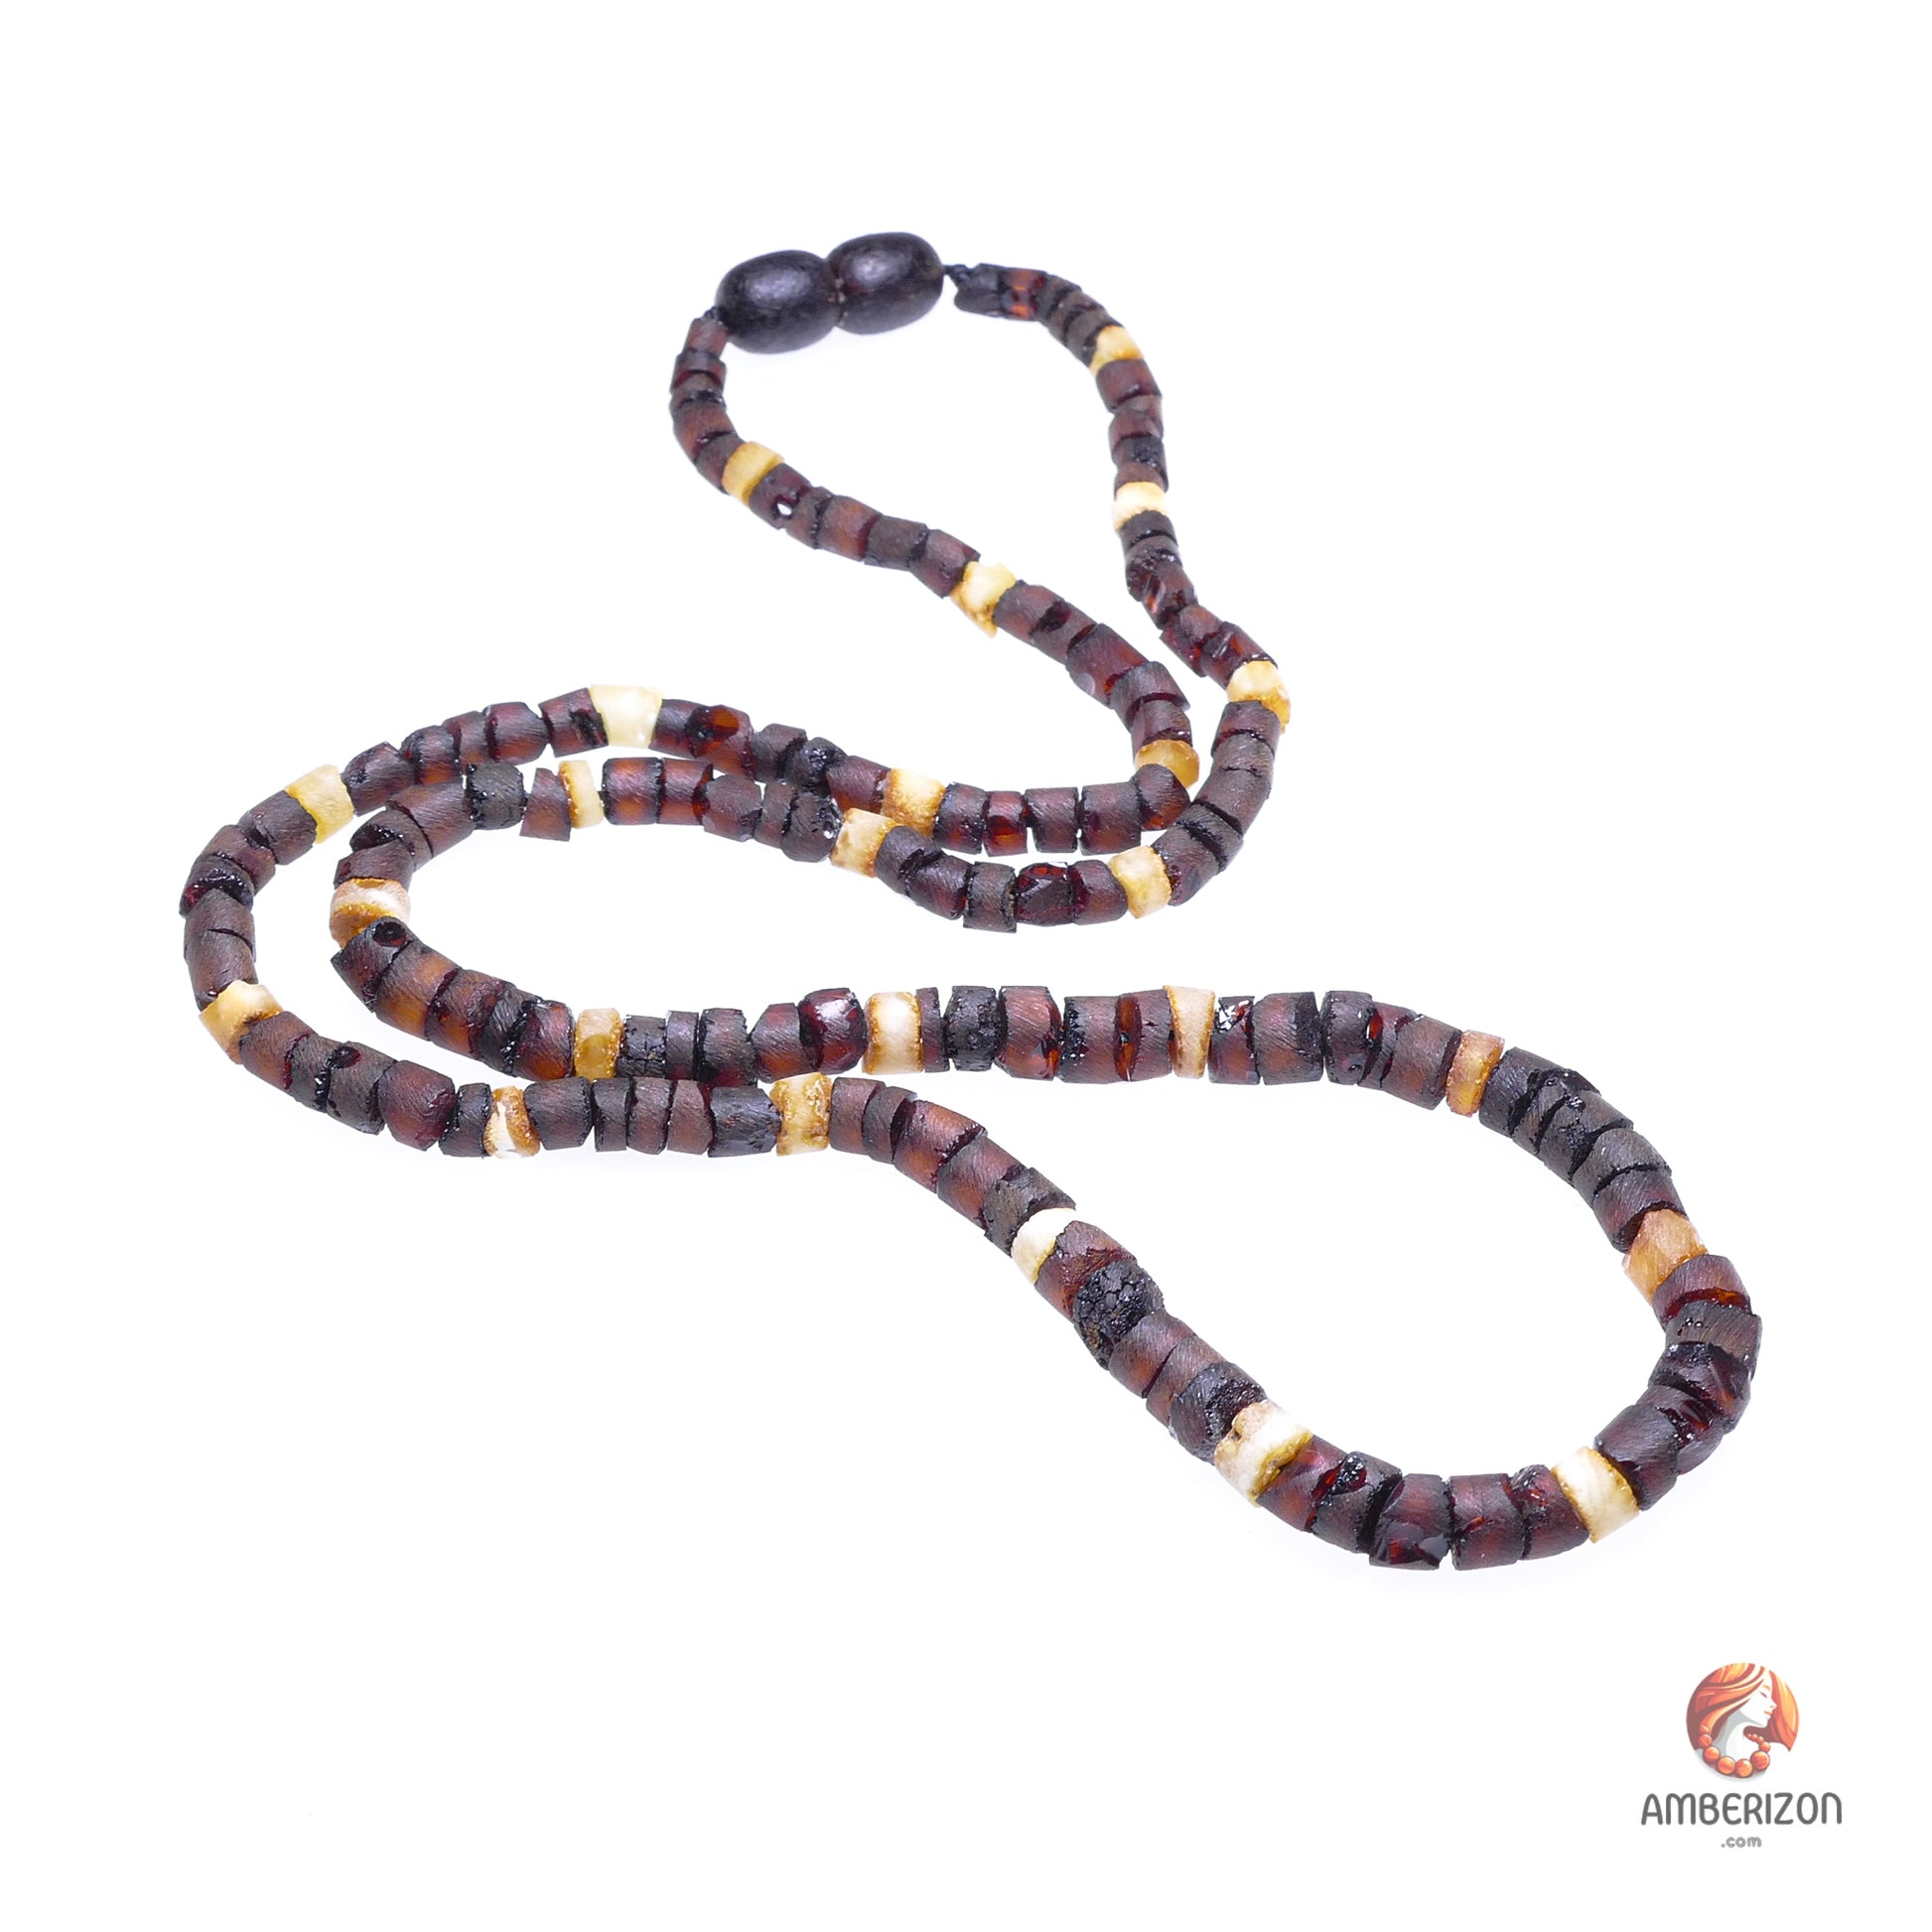 Women's necklace - Cylinder unpolished amber beads in cherry and butterscotch colors